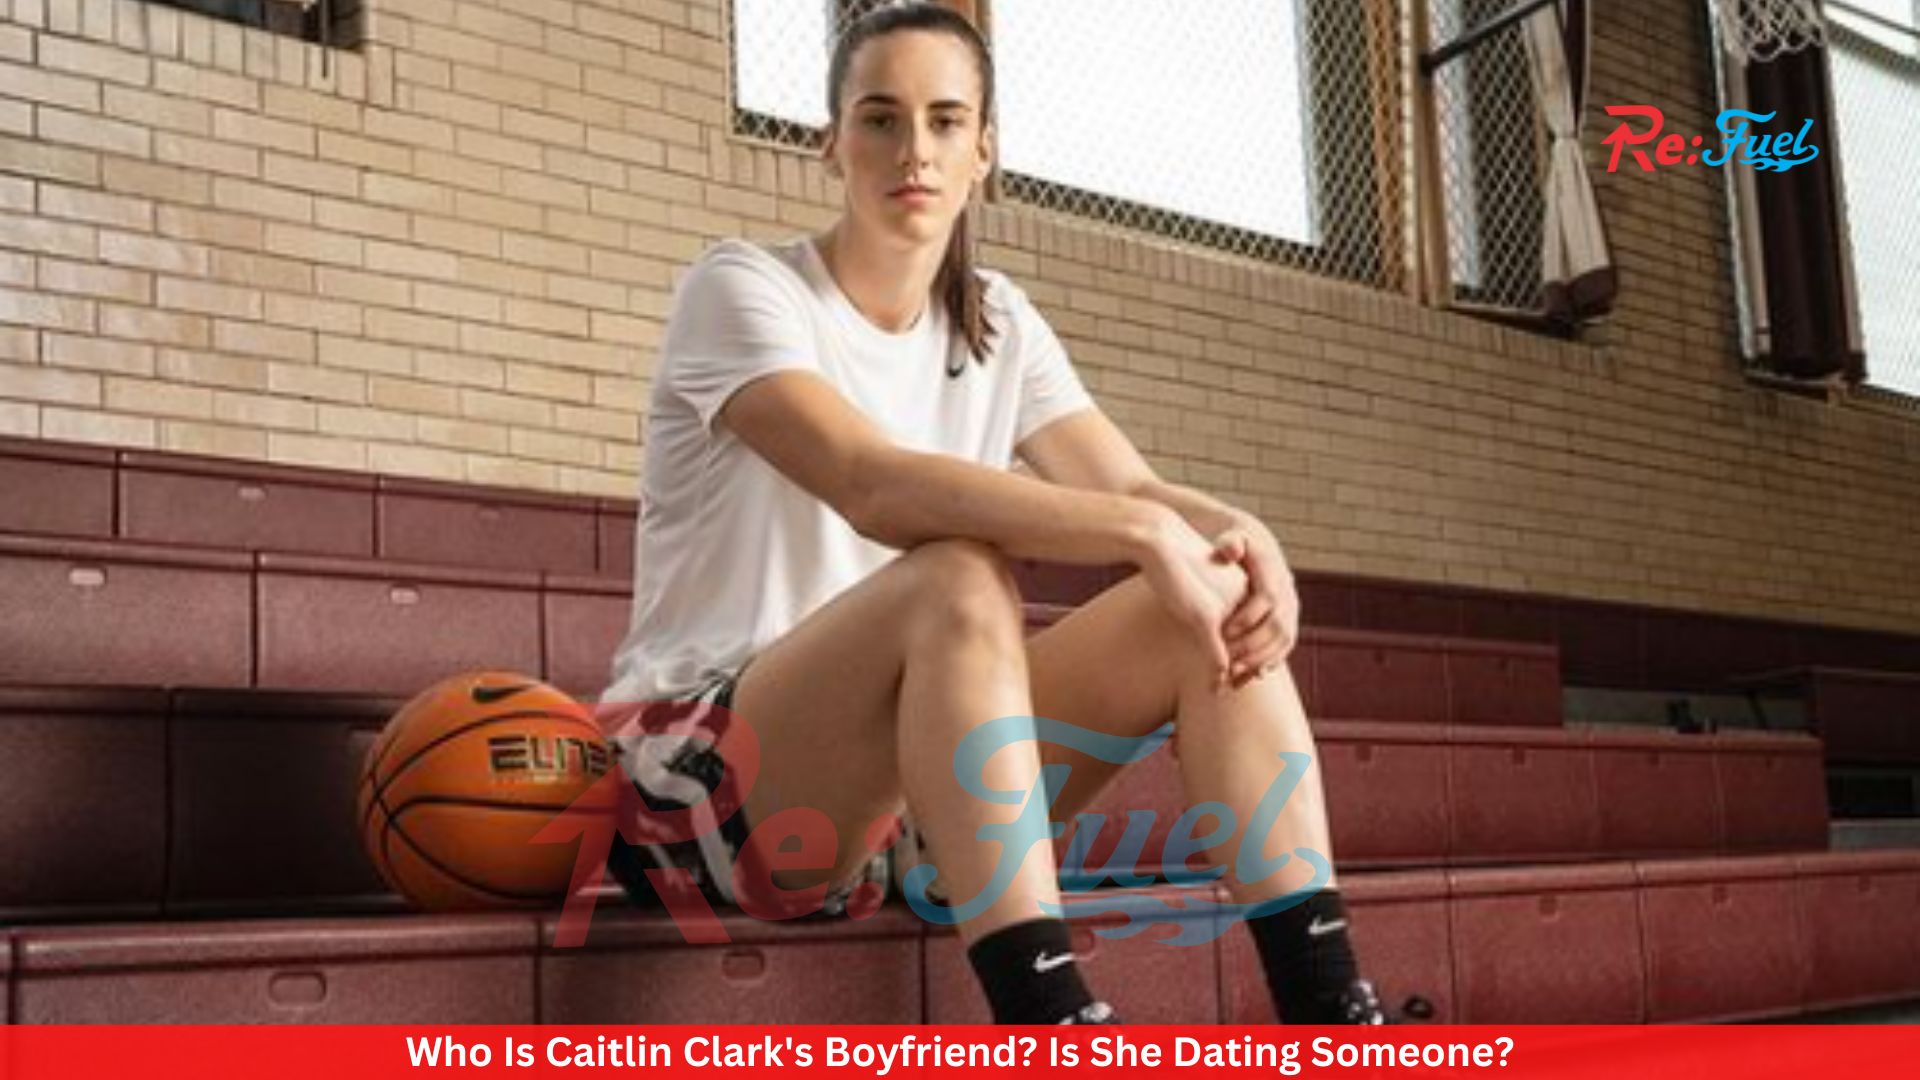 Who Is Caitlin Clark's Boyfriend? Is She Dating Someone?